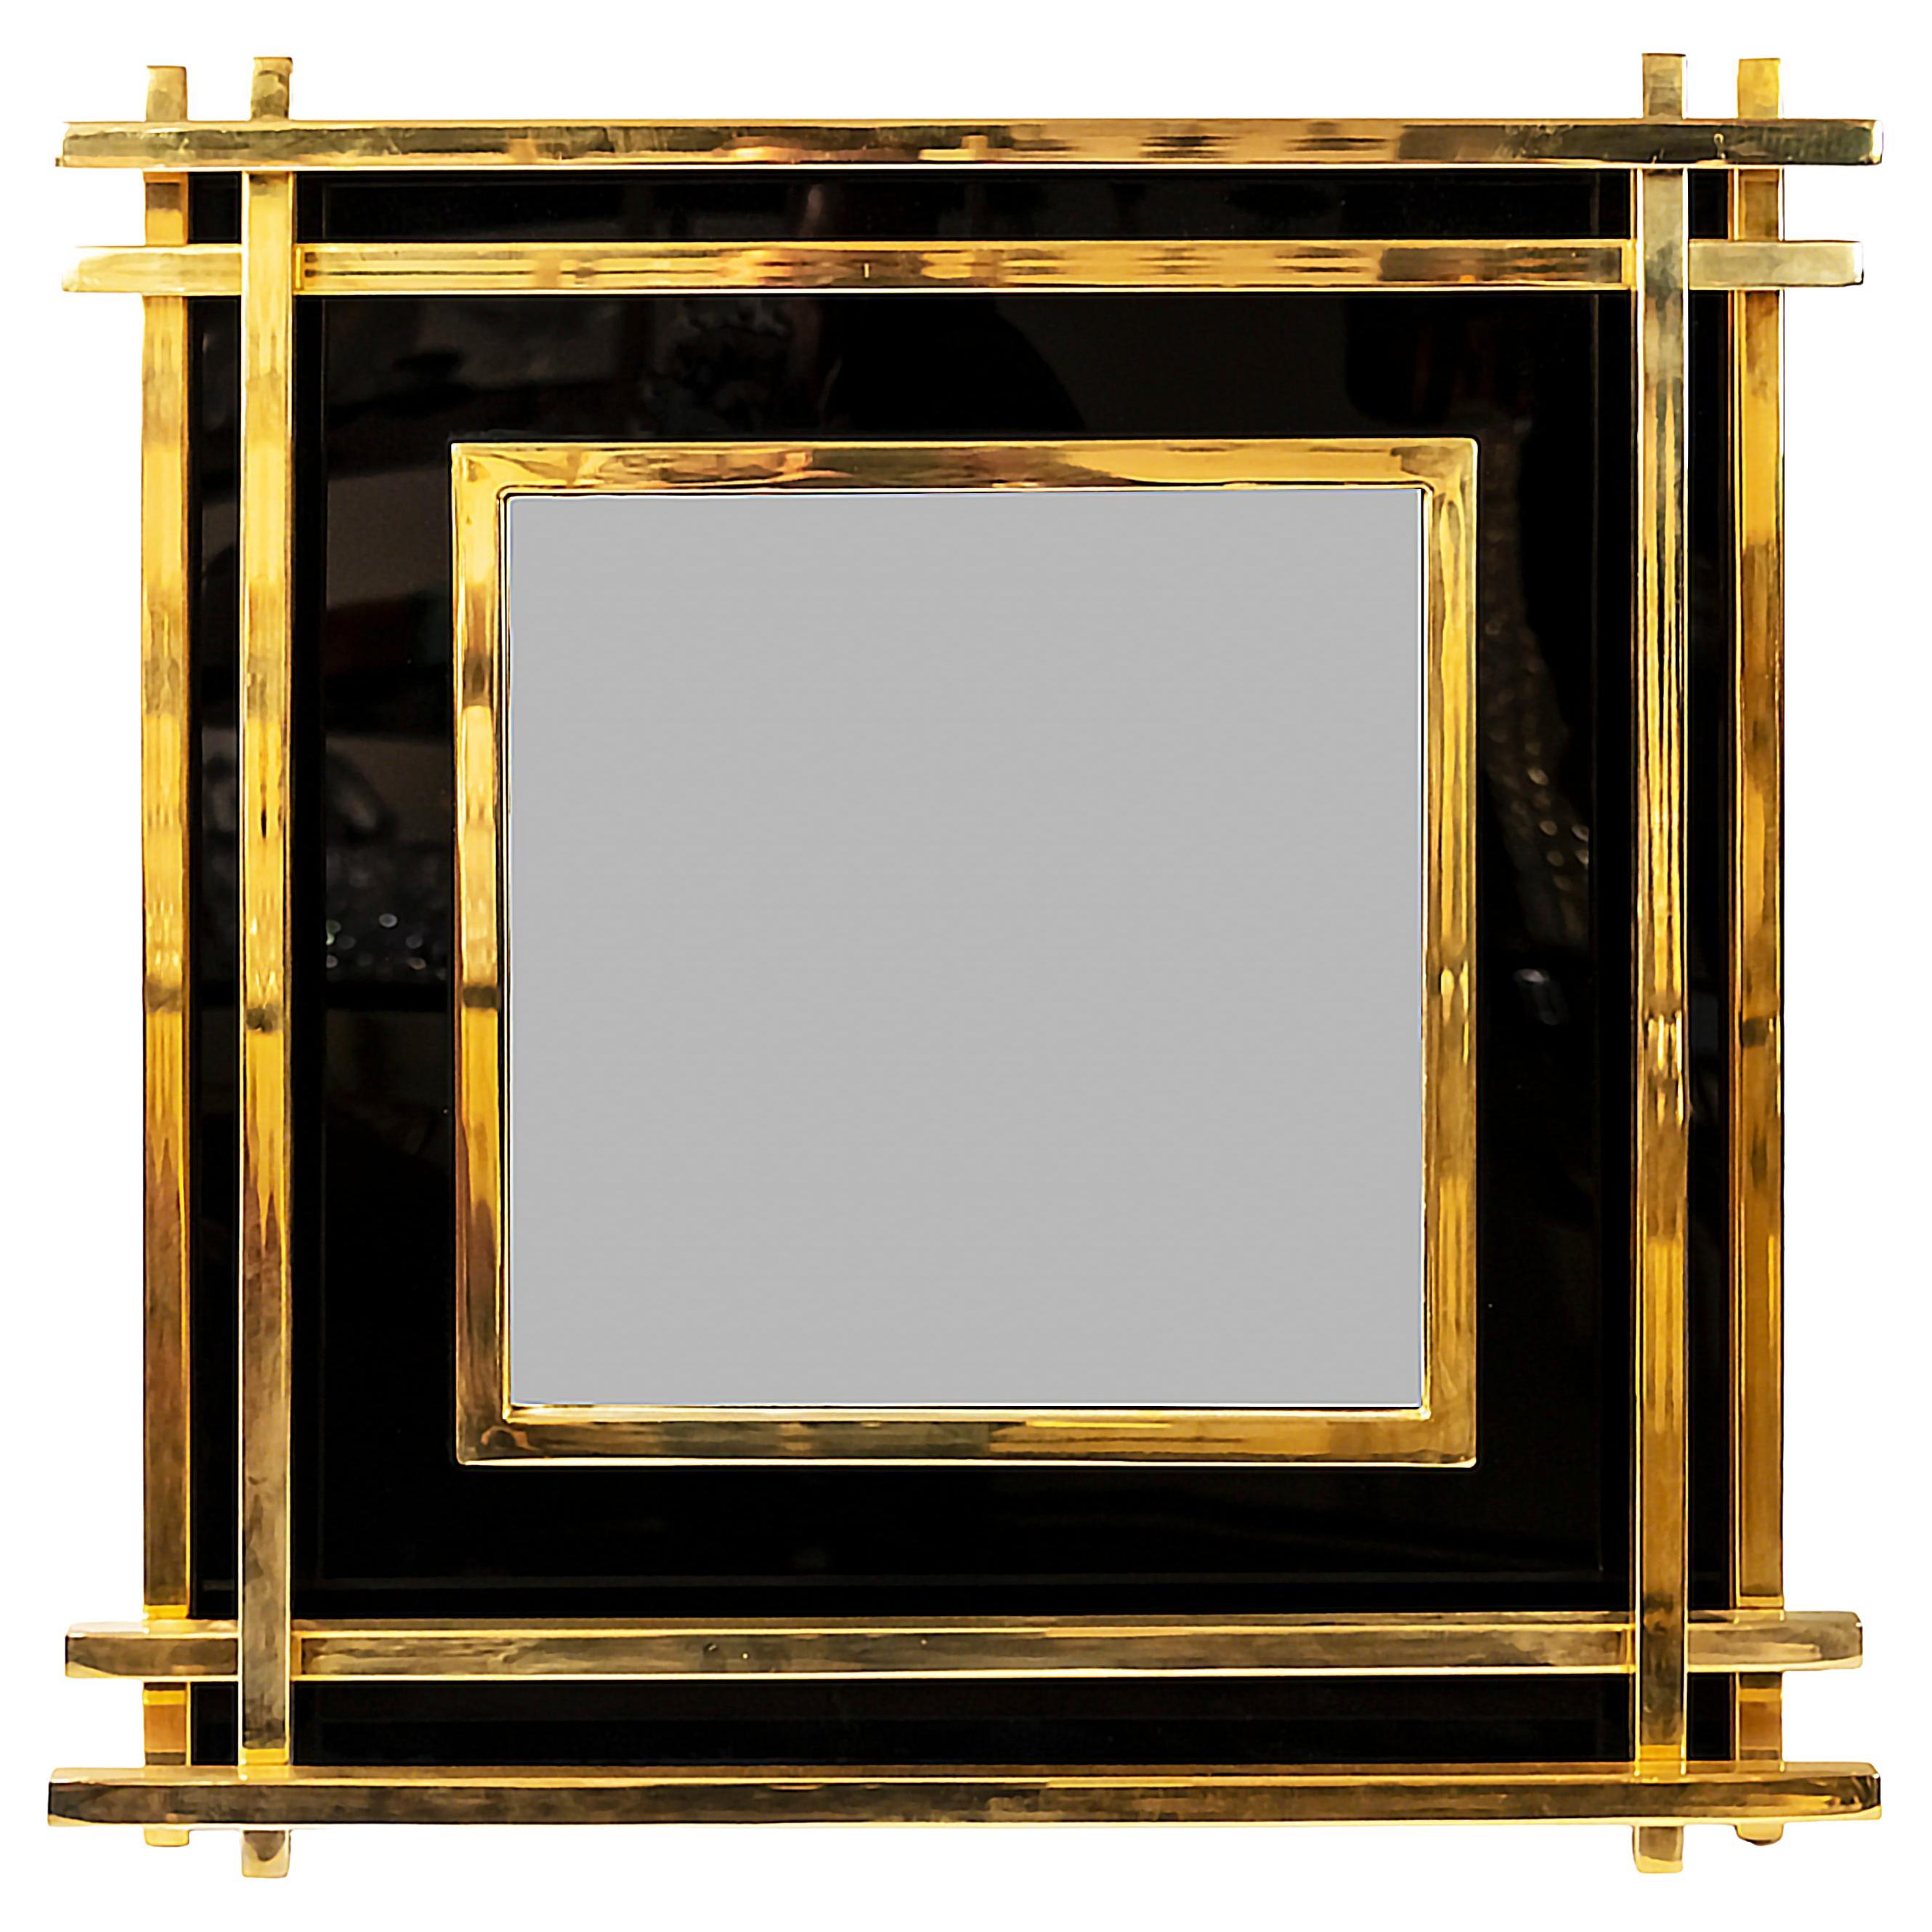 Midcentury Italian Brass and Plexiglass Wall Mirror from 1970s For Sale